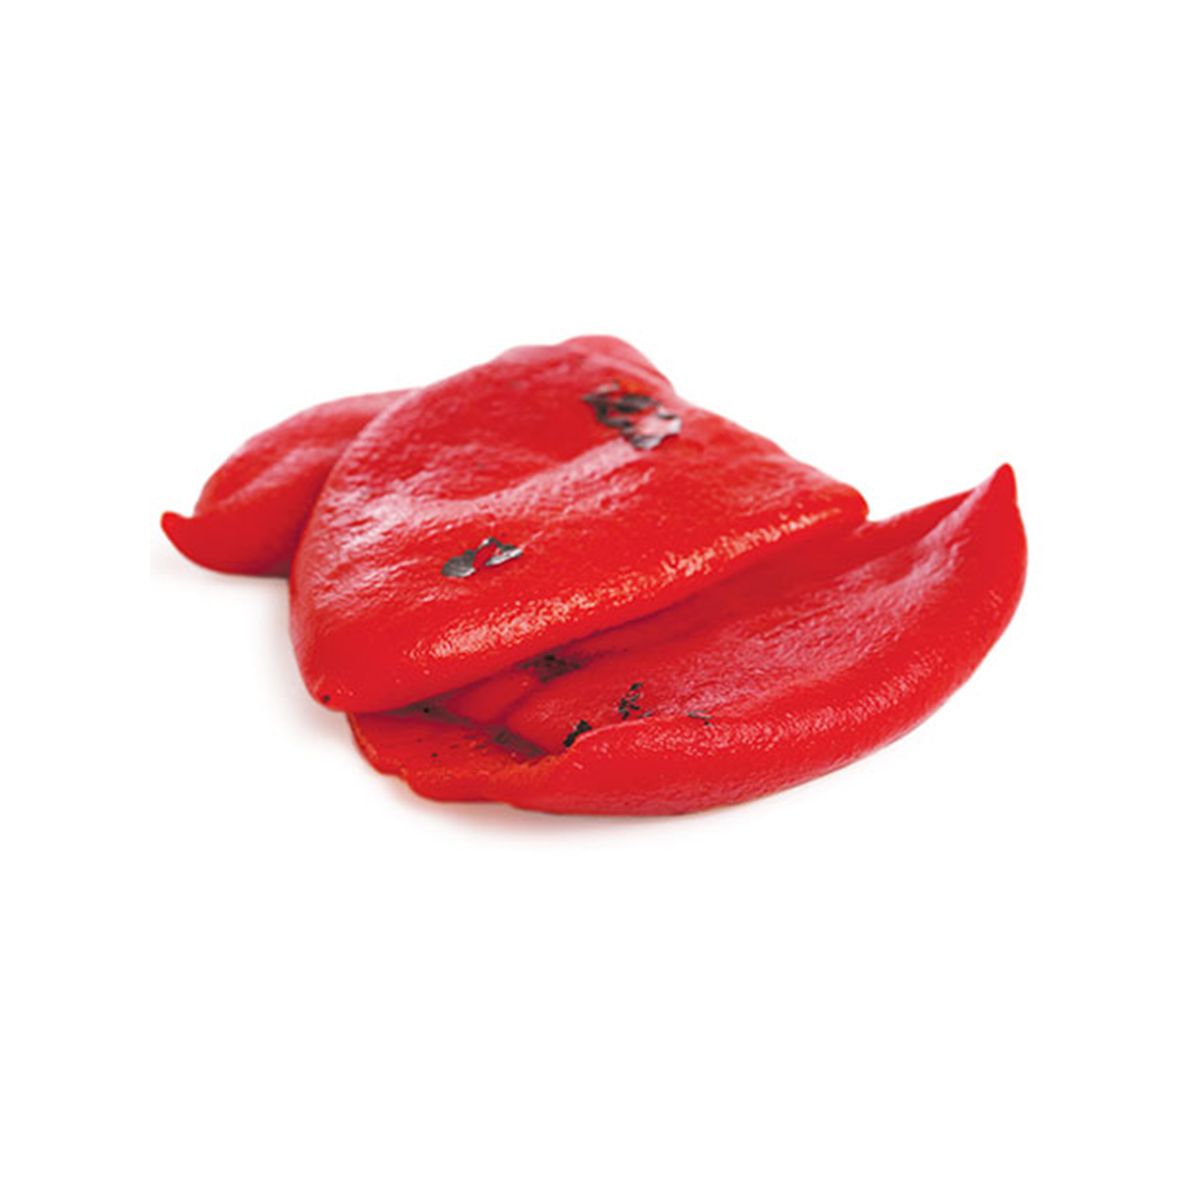 Foodmatch Divina Roasted Whole Red Peppers Cans 5.75 LB